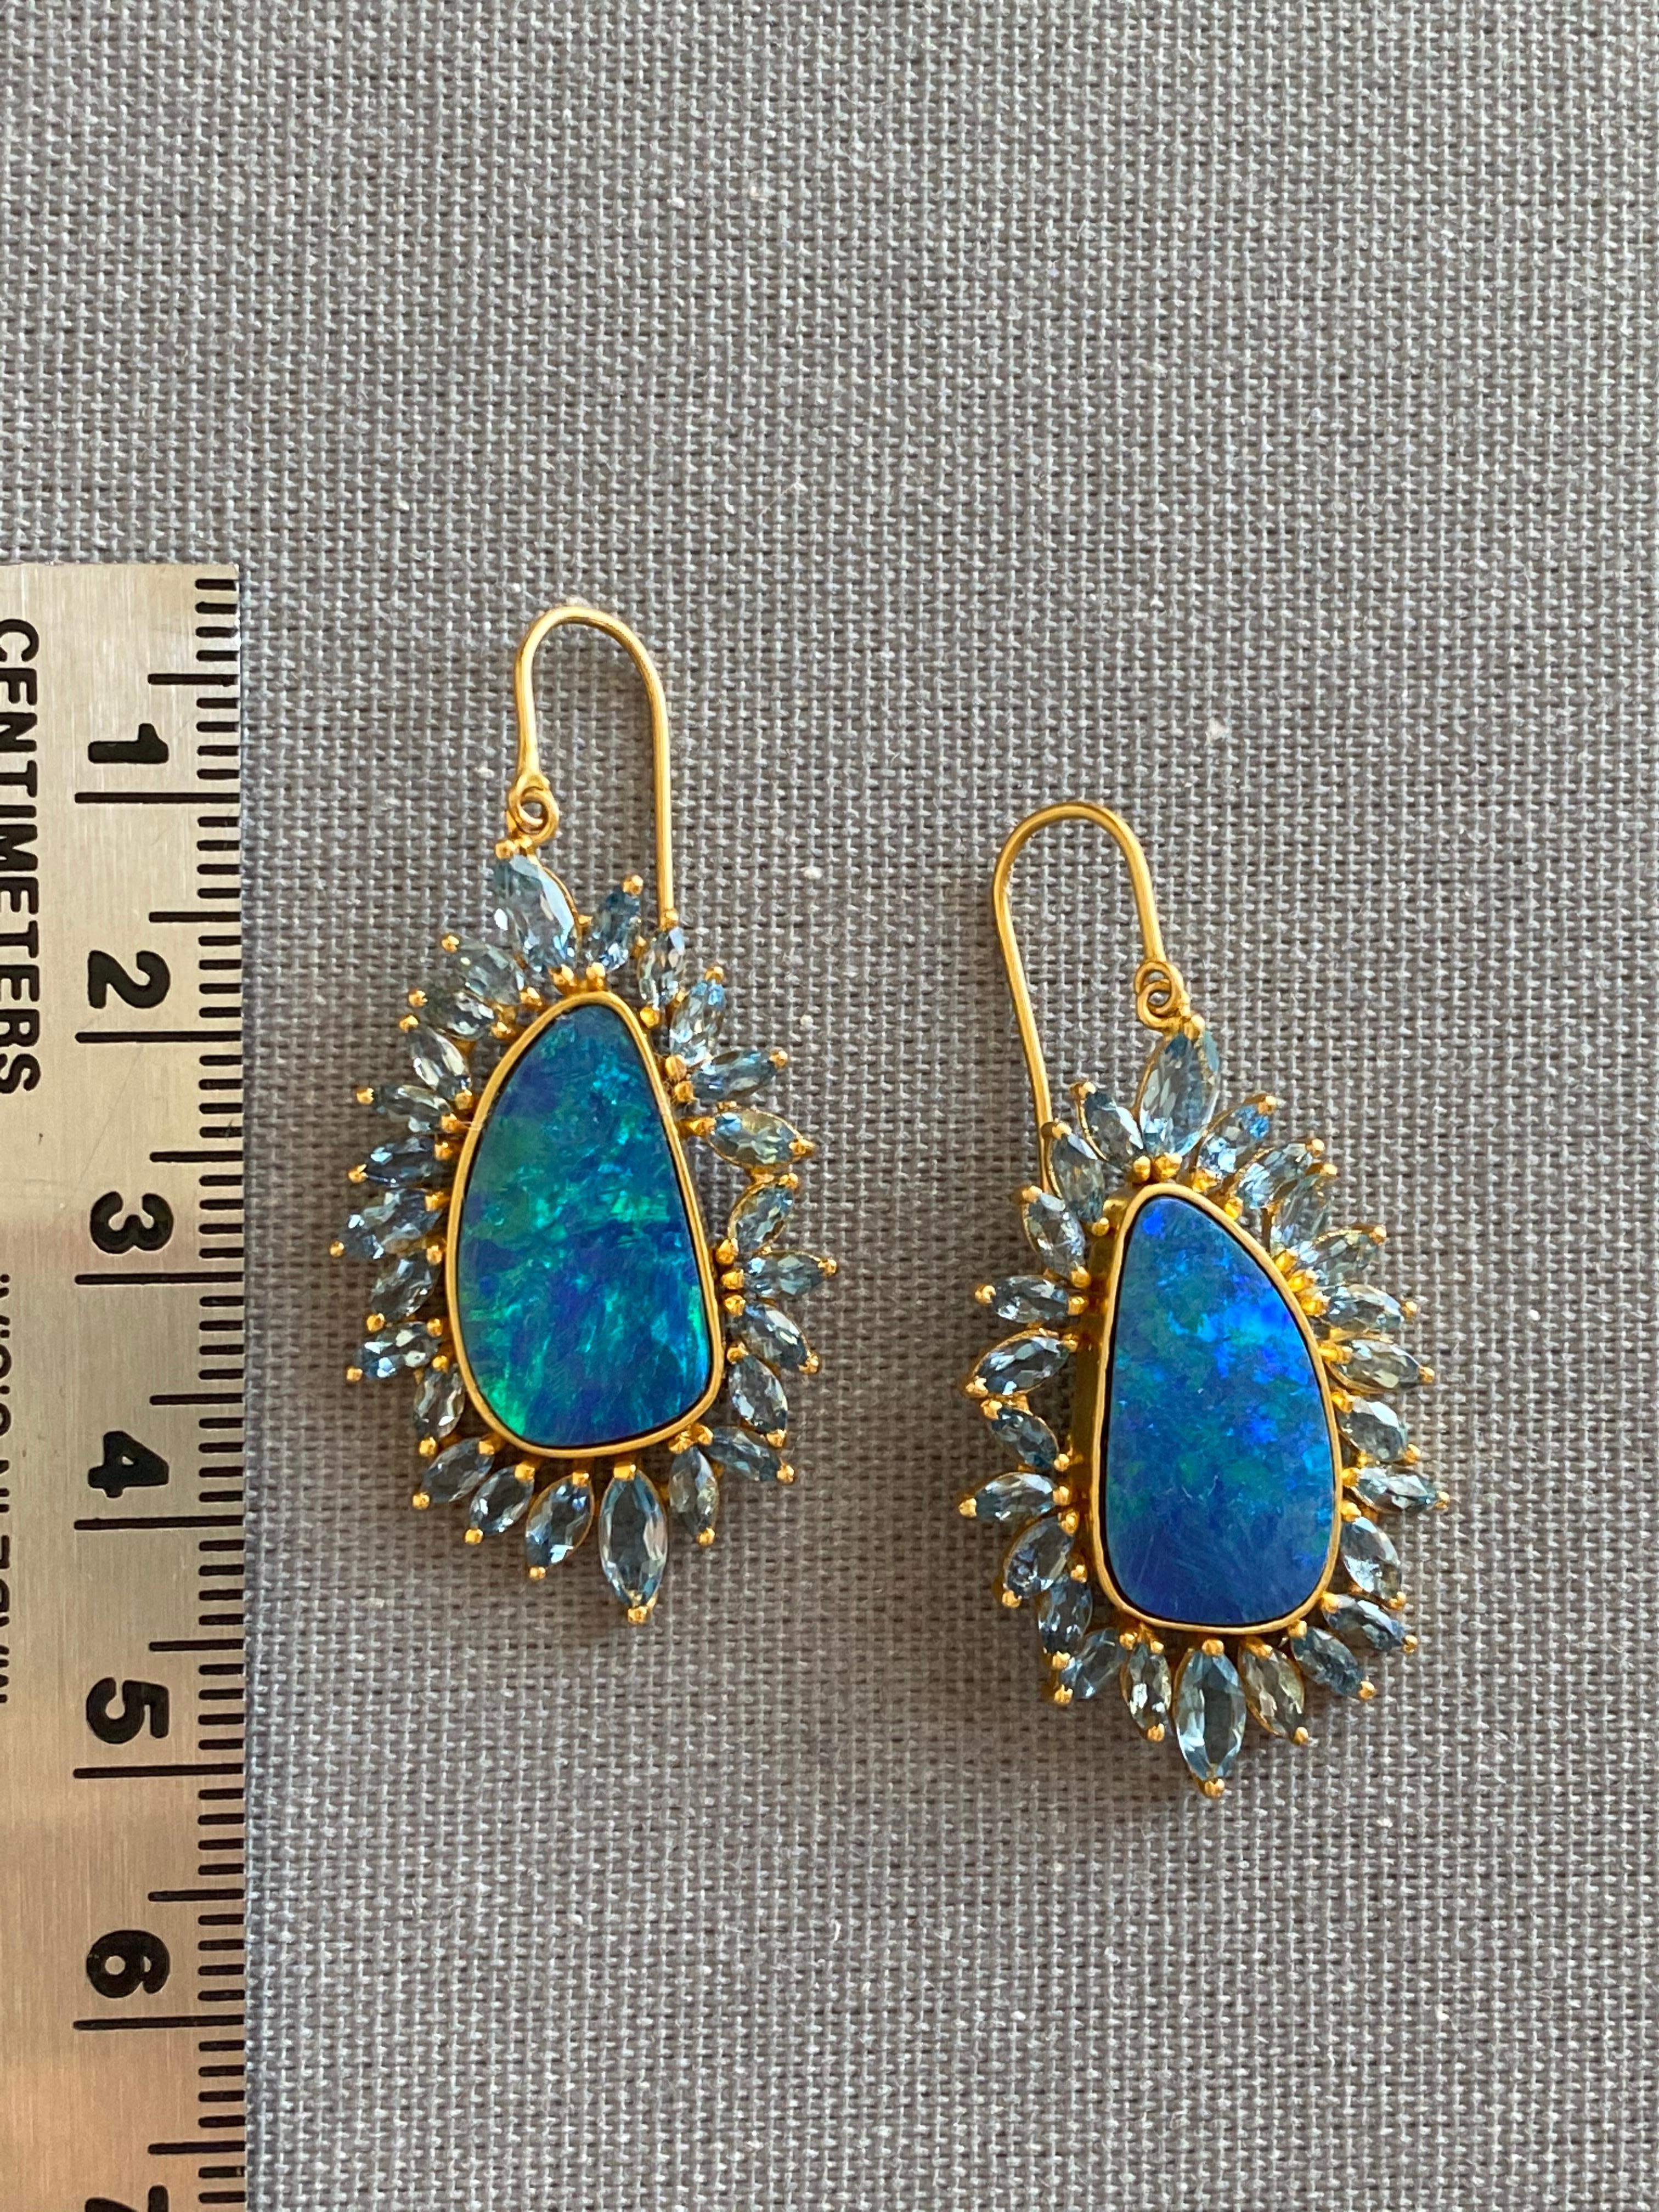 Designed by award winning jewelry designer, Lauren Harper, these Boulder Opal and Aquamarine earrings are simply stunning. The Opals have both blue and green flash and are surrounded by a hand made 18kt Gold crown of marquis shaped faceted